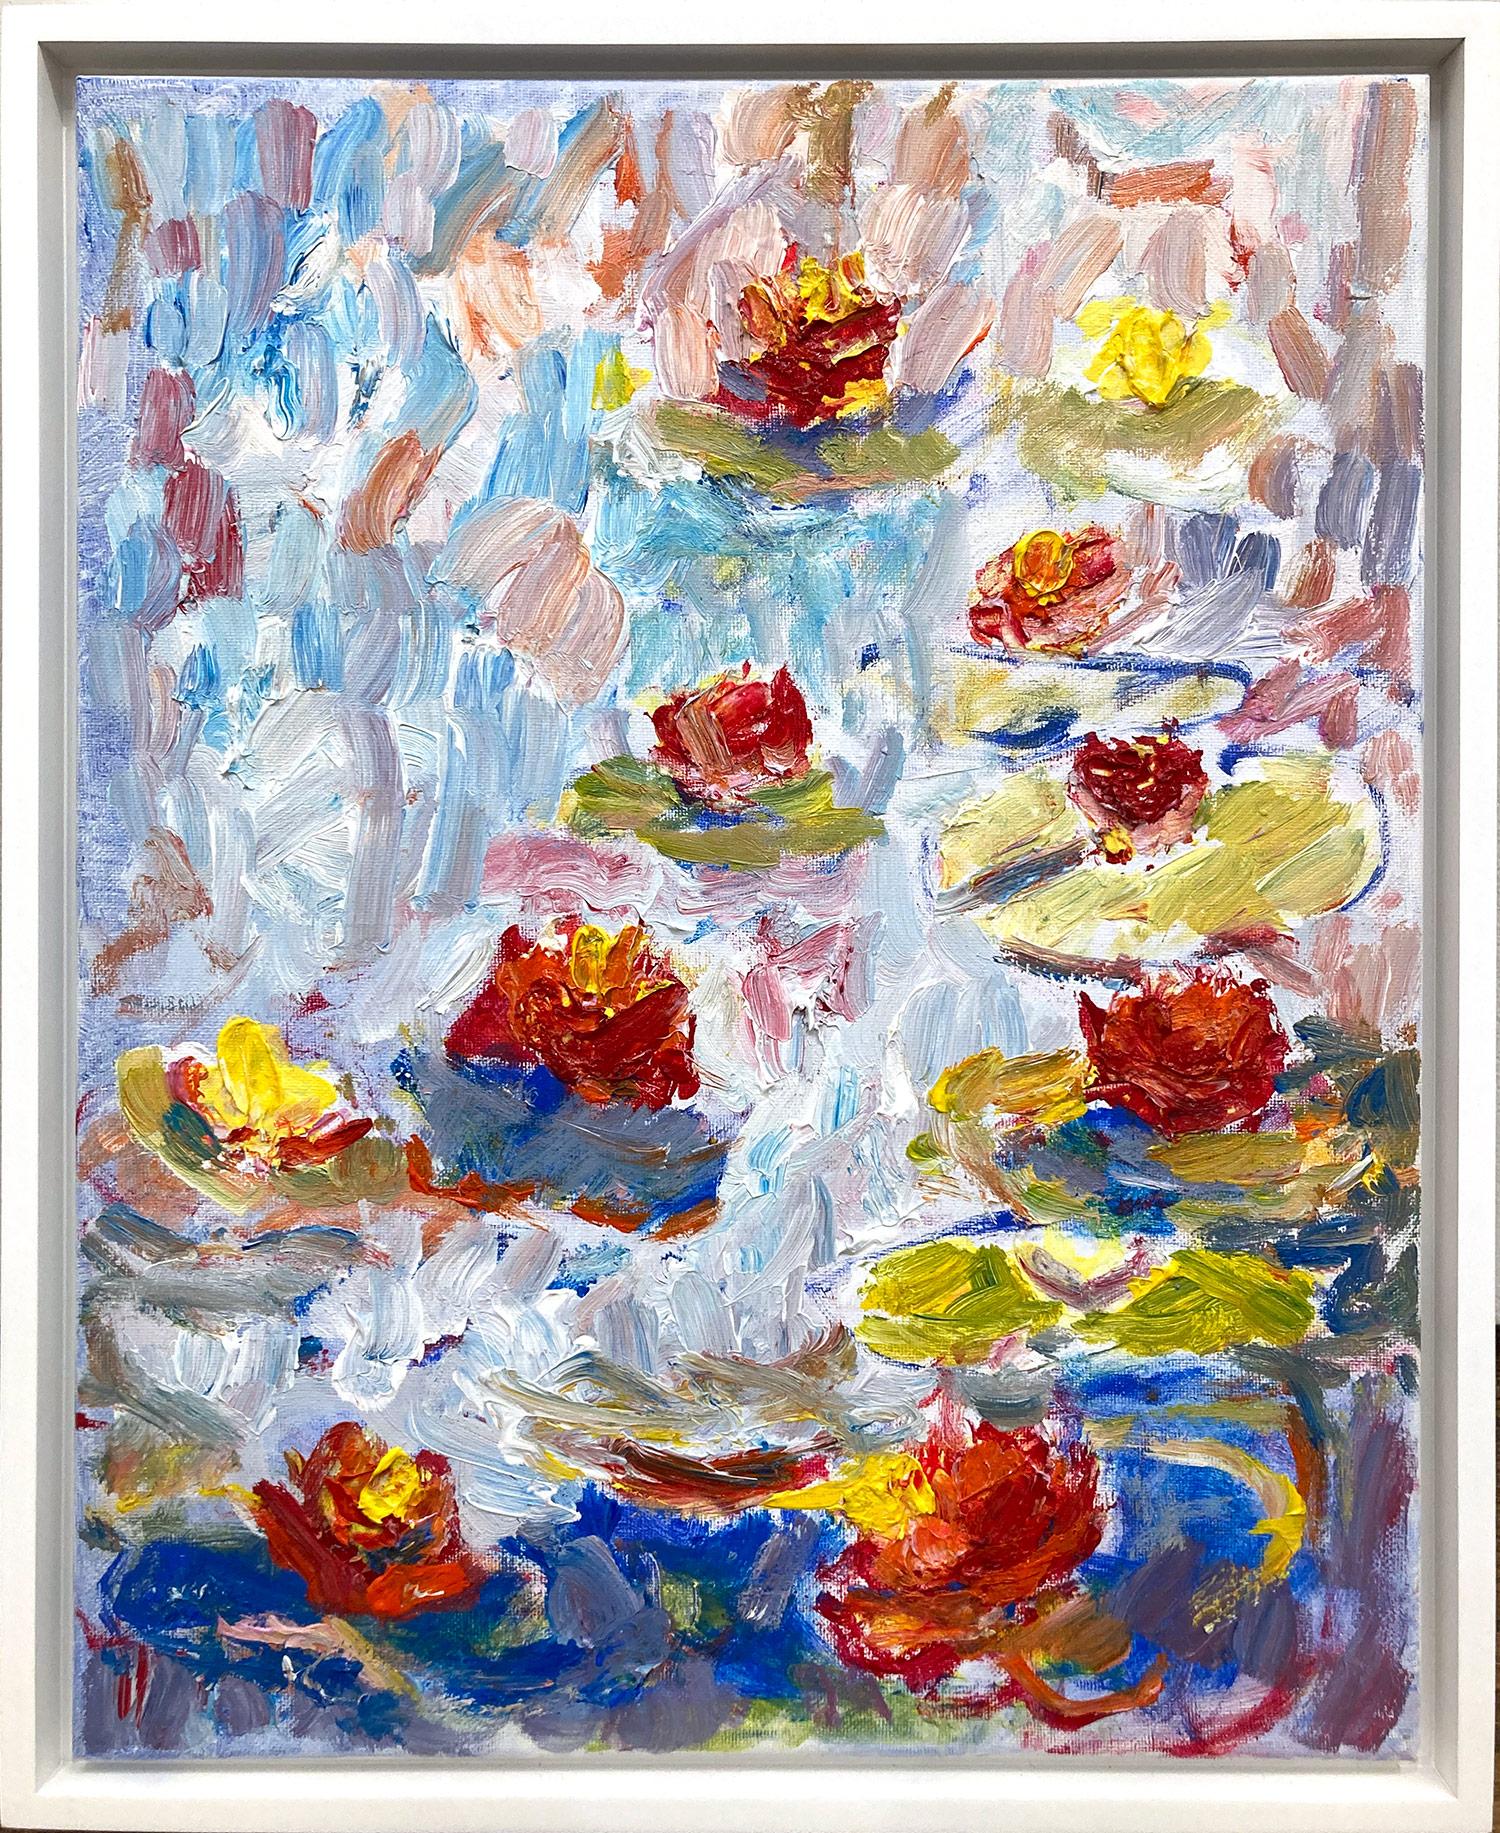 Robert Gregory Phillips Abstract Painting - "On the Water They Rest Gloriously" Contemporary Painting in the style of Monet